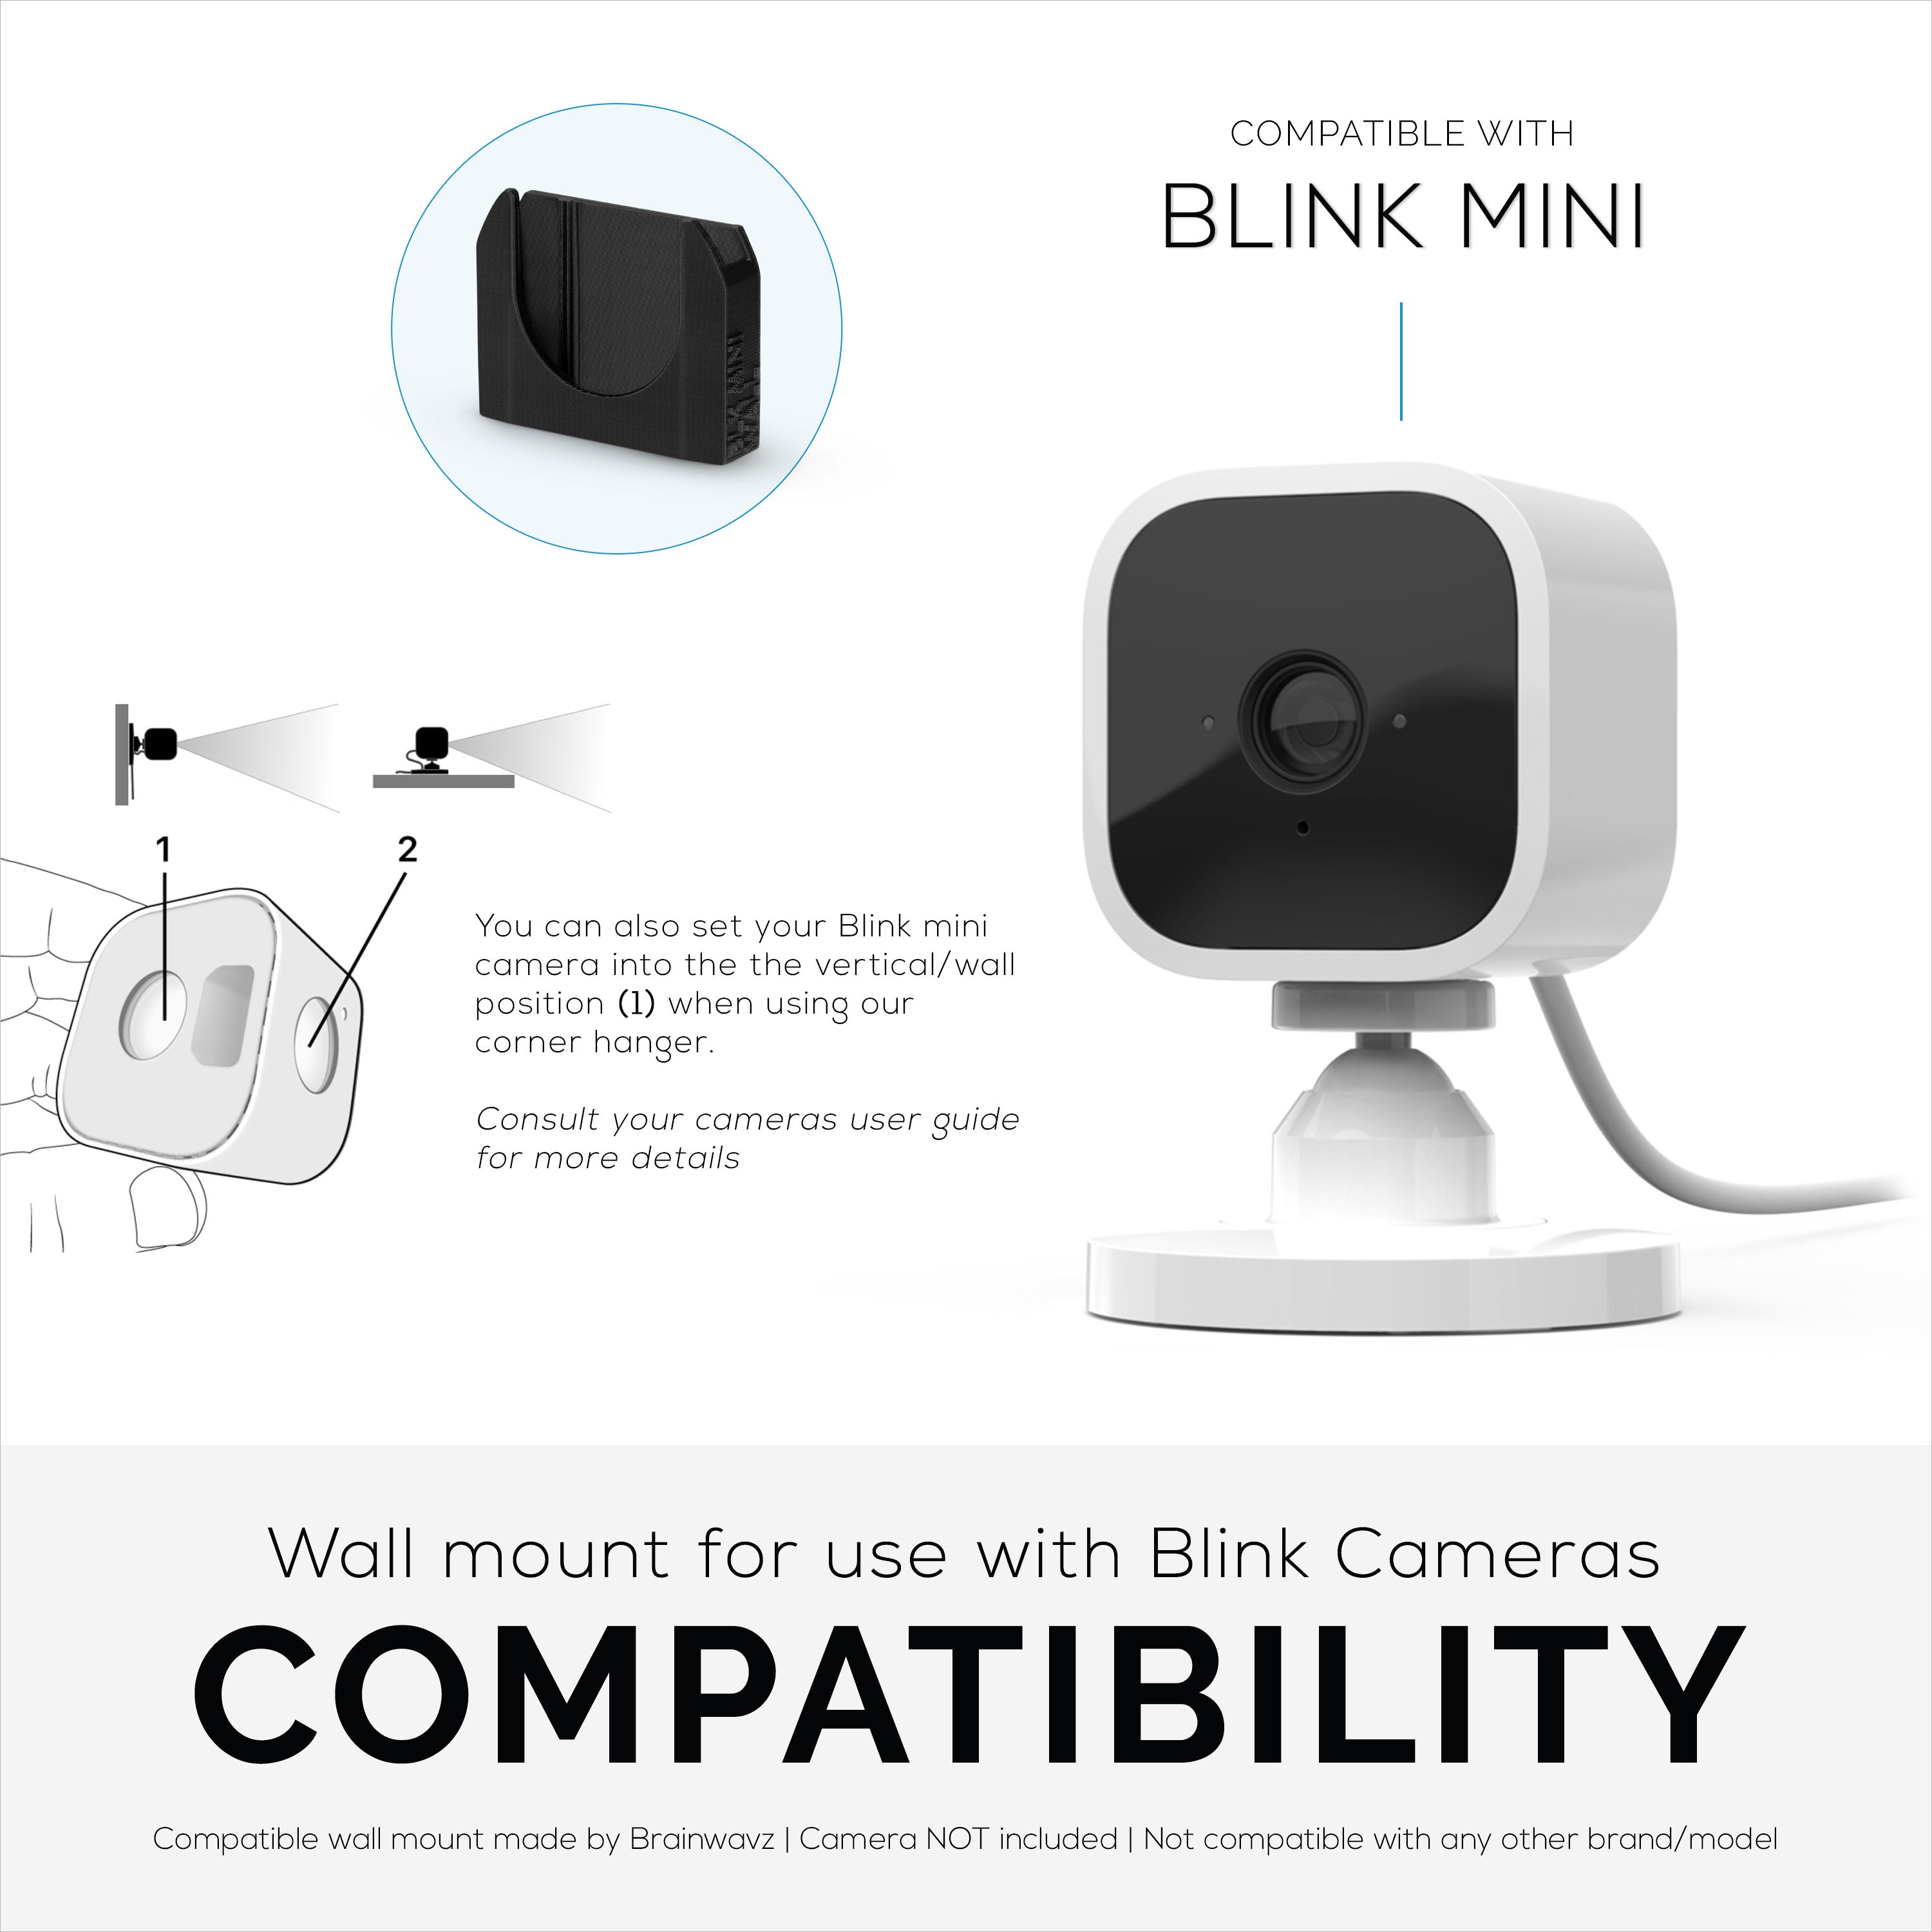 Koroao 2PACK Blink Mini Outlet Wall Mounts - AC Outlet Wall Plug Mount  Stand Holder Bracket for Blink Mini Indoor Camera Without Messy Wires or